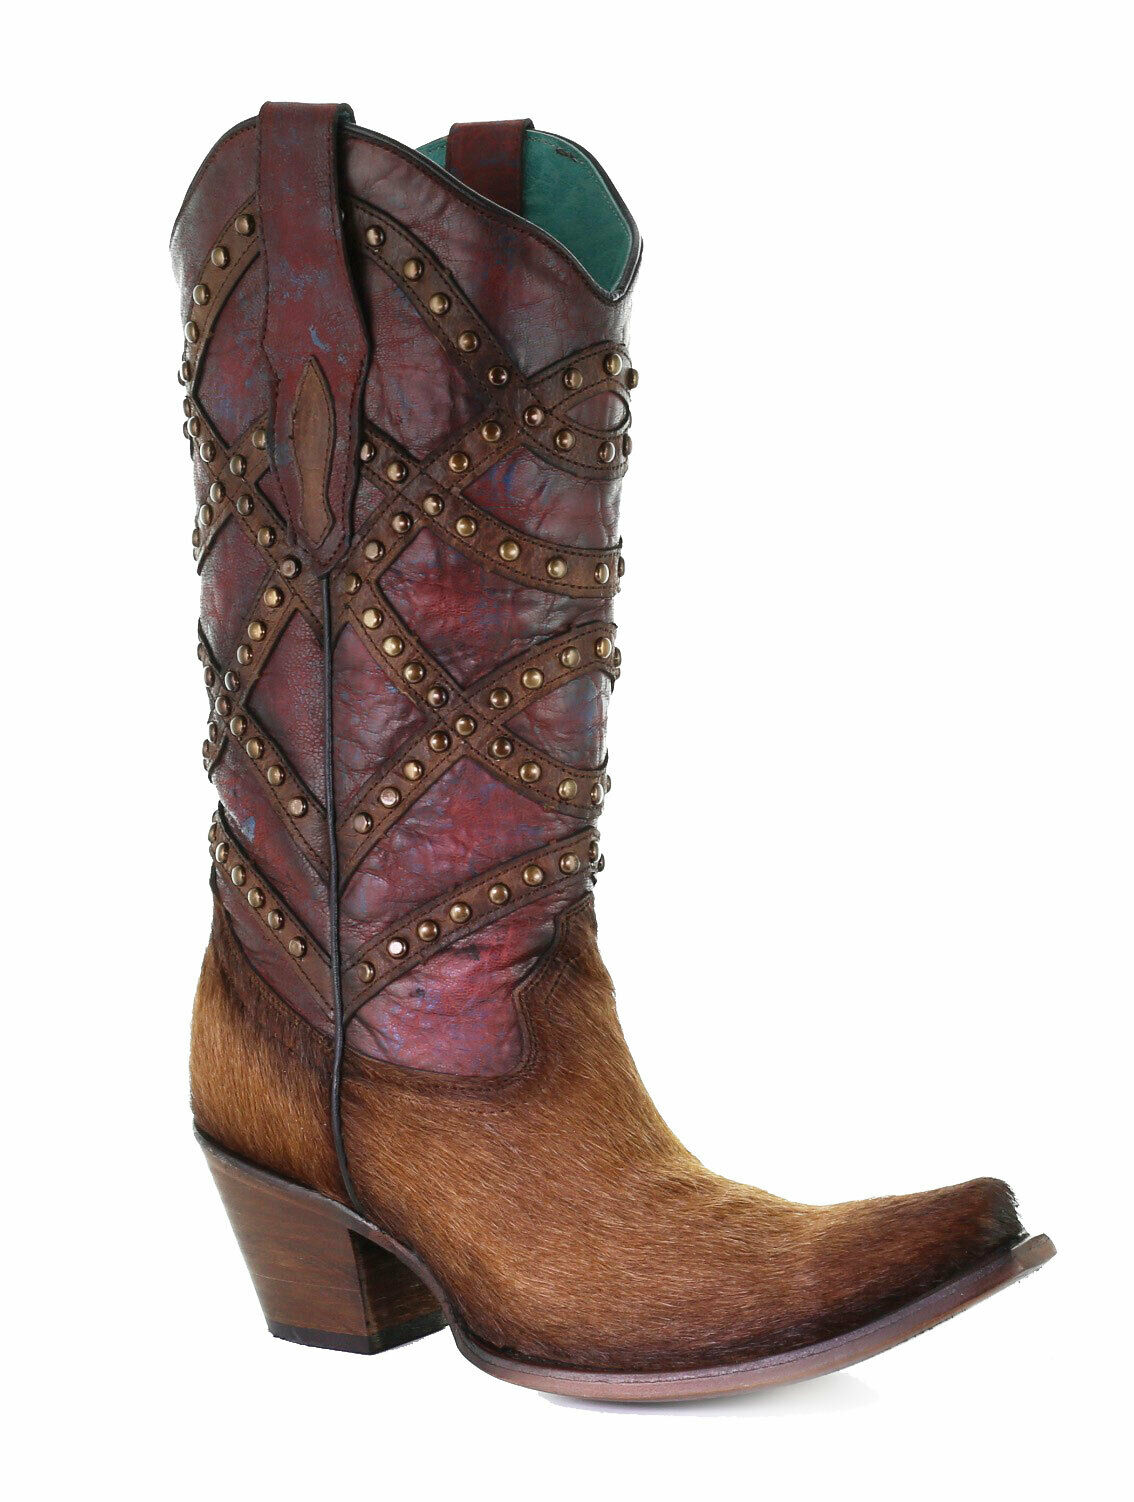 Corral Women's Brown/Red Fur & Overlay & Studs Boots C3608